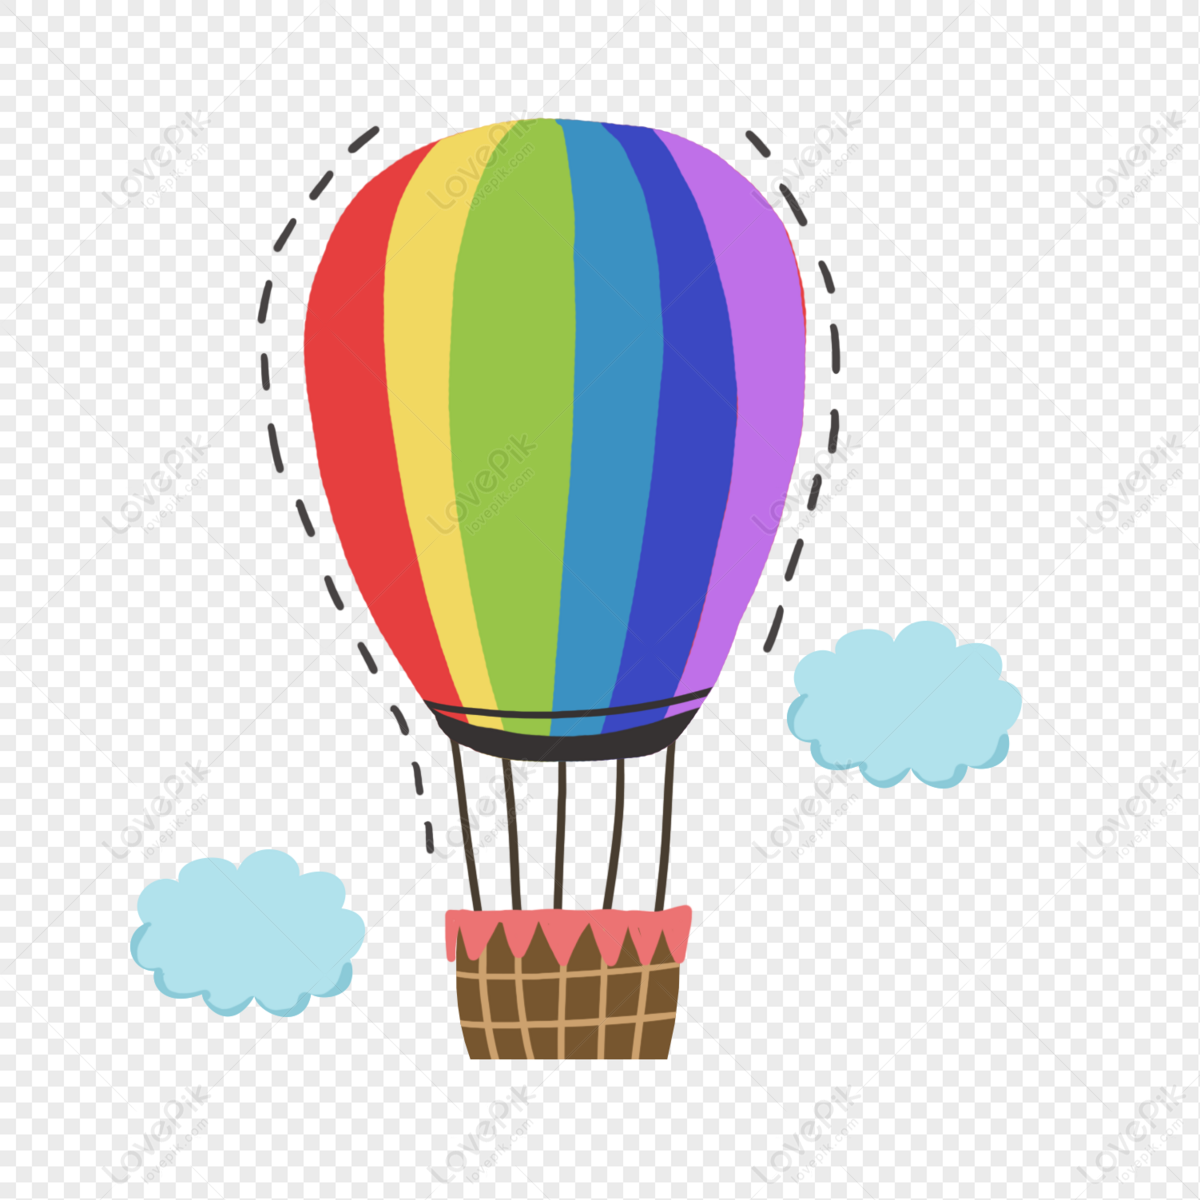 Colorful Hand Drawn Cartoon Hot Air Balloon PNG Picture And Clipart Image  For Free Download - Lovepik | 401455945